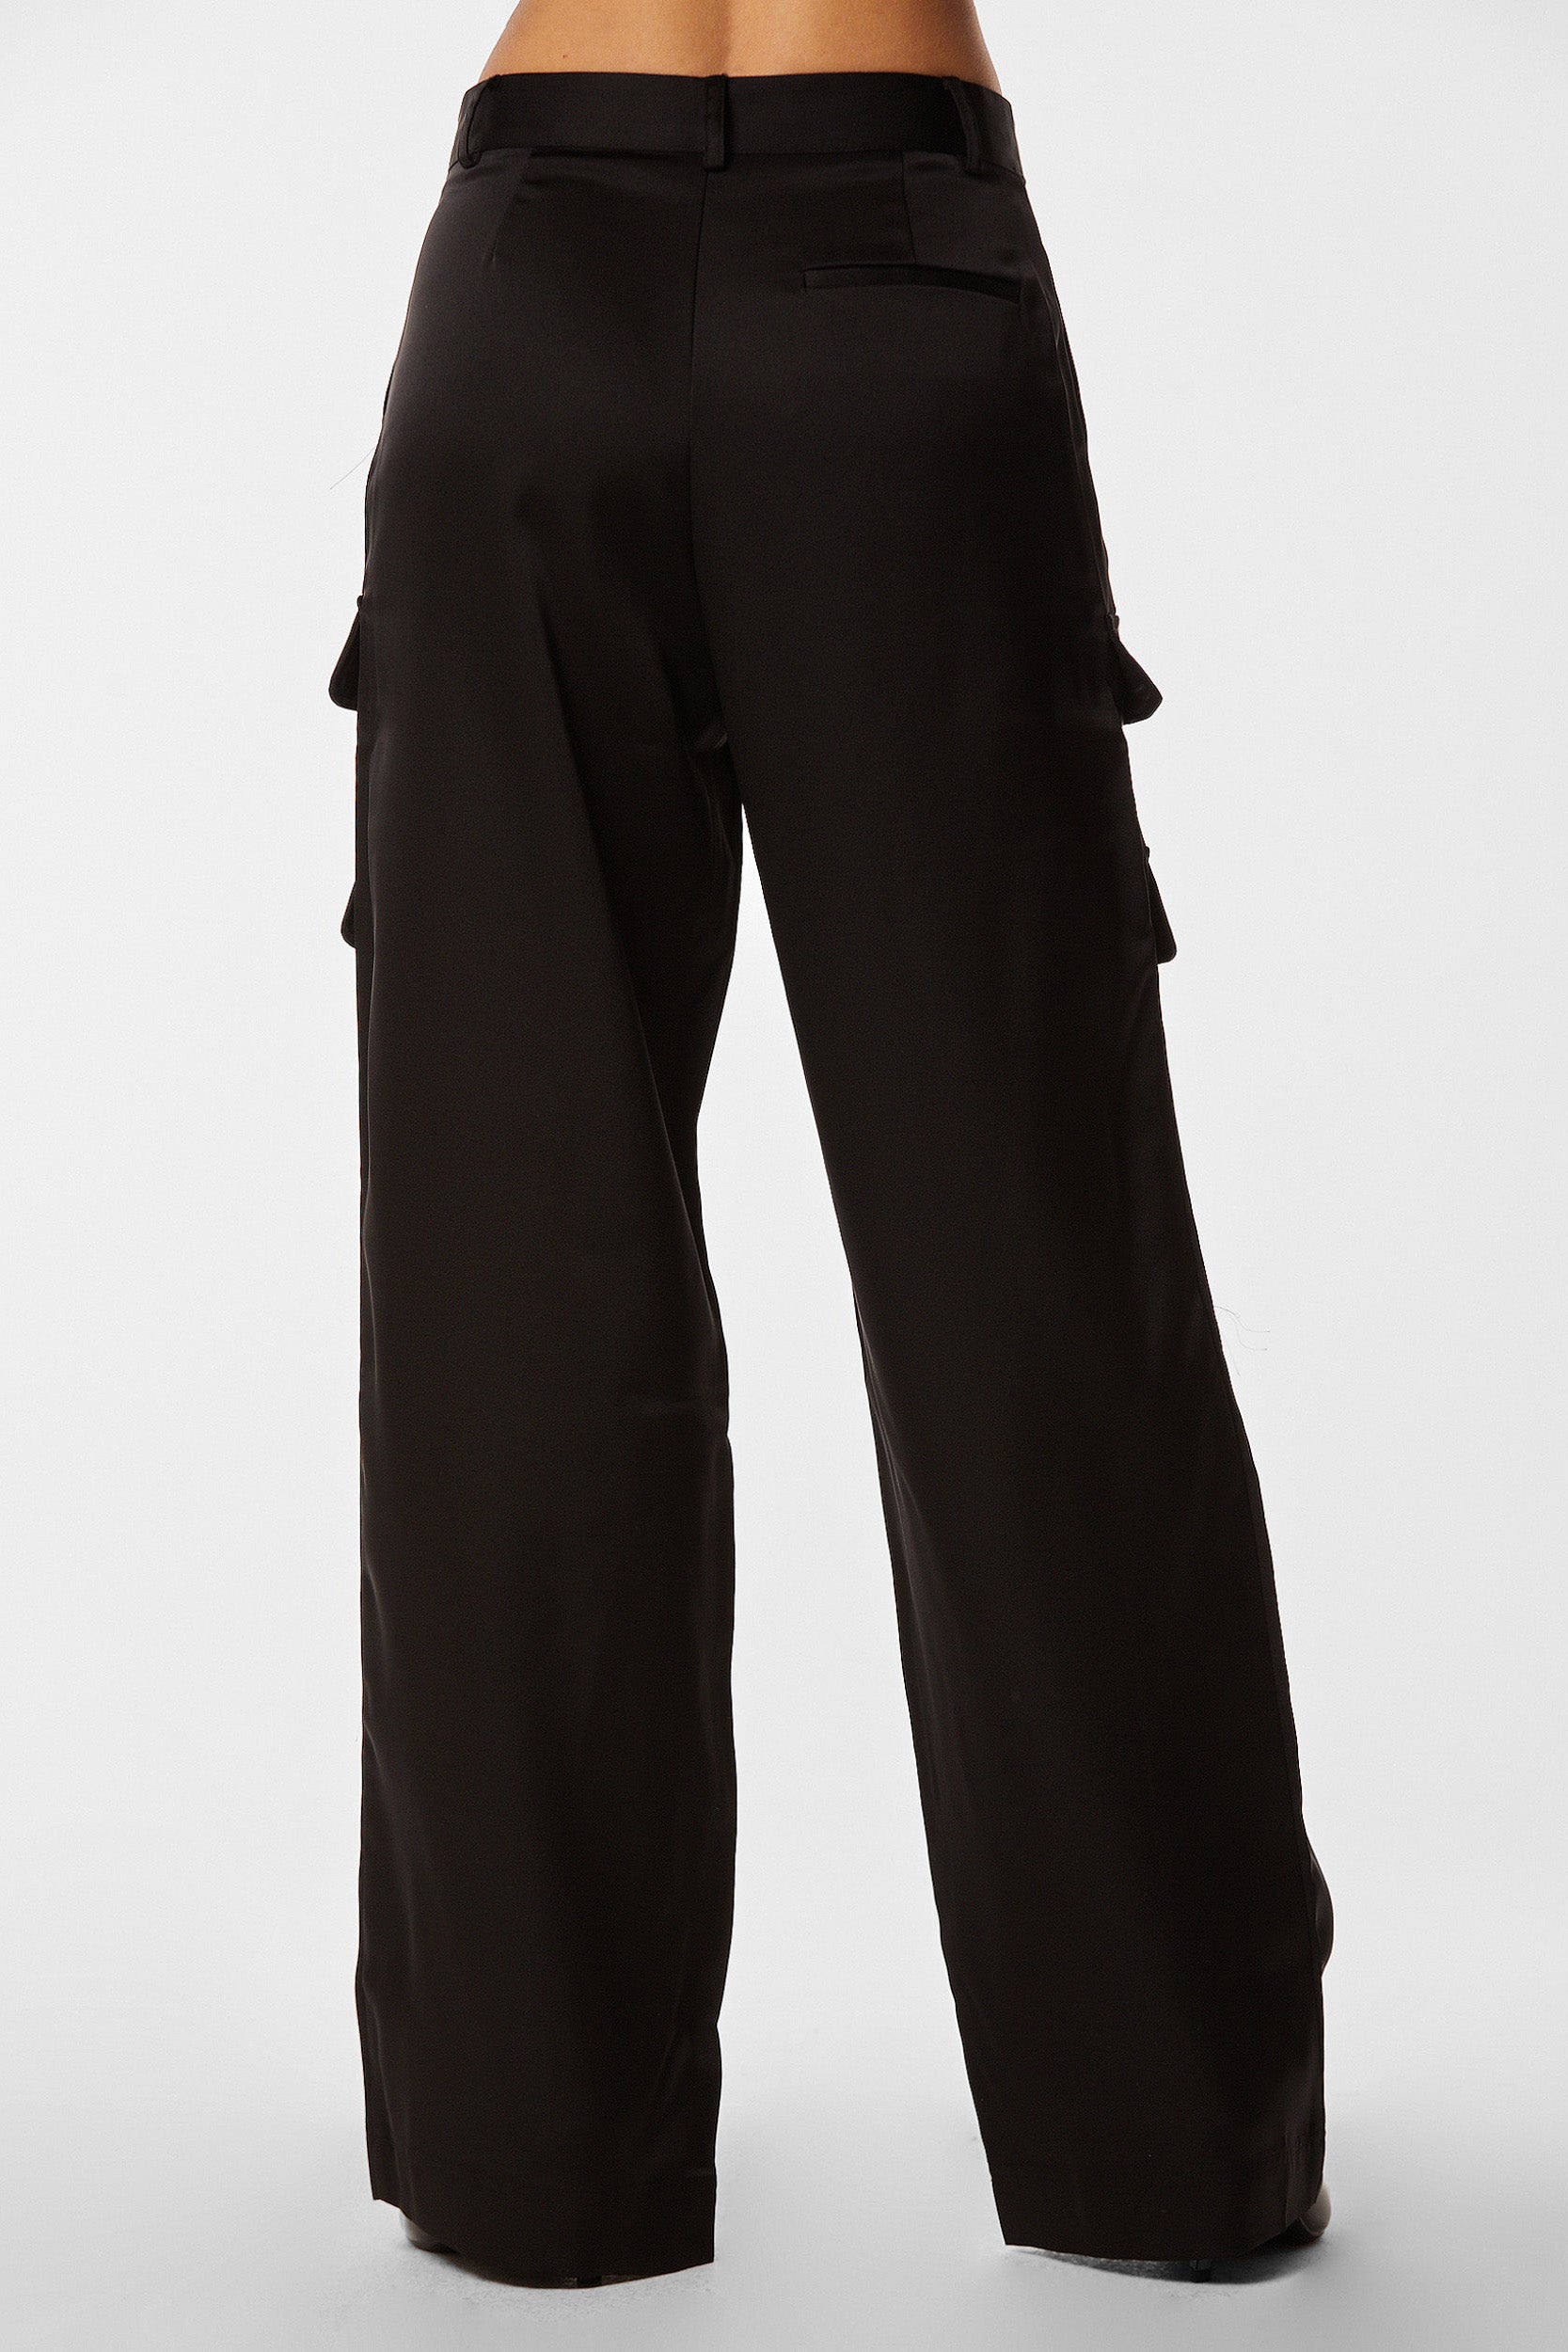 A person is wearing the Milan Satin Cargo Pant in black, high-waisted with a wide-leg design, shown from the back. These versatile trousers feature side pockets with flaps and have a relaxed fit. Crafted from luxurious satin fabric, the plain white background highlights the garment beautifully.